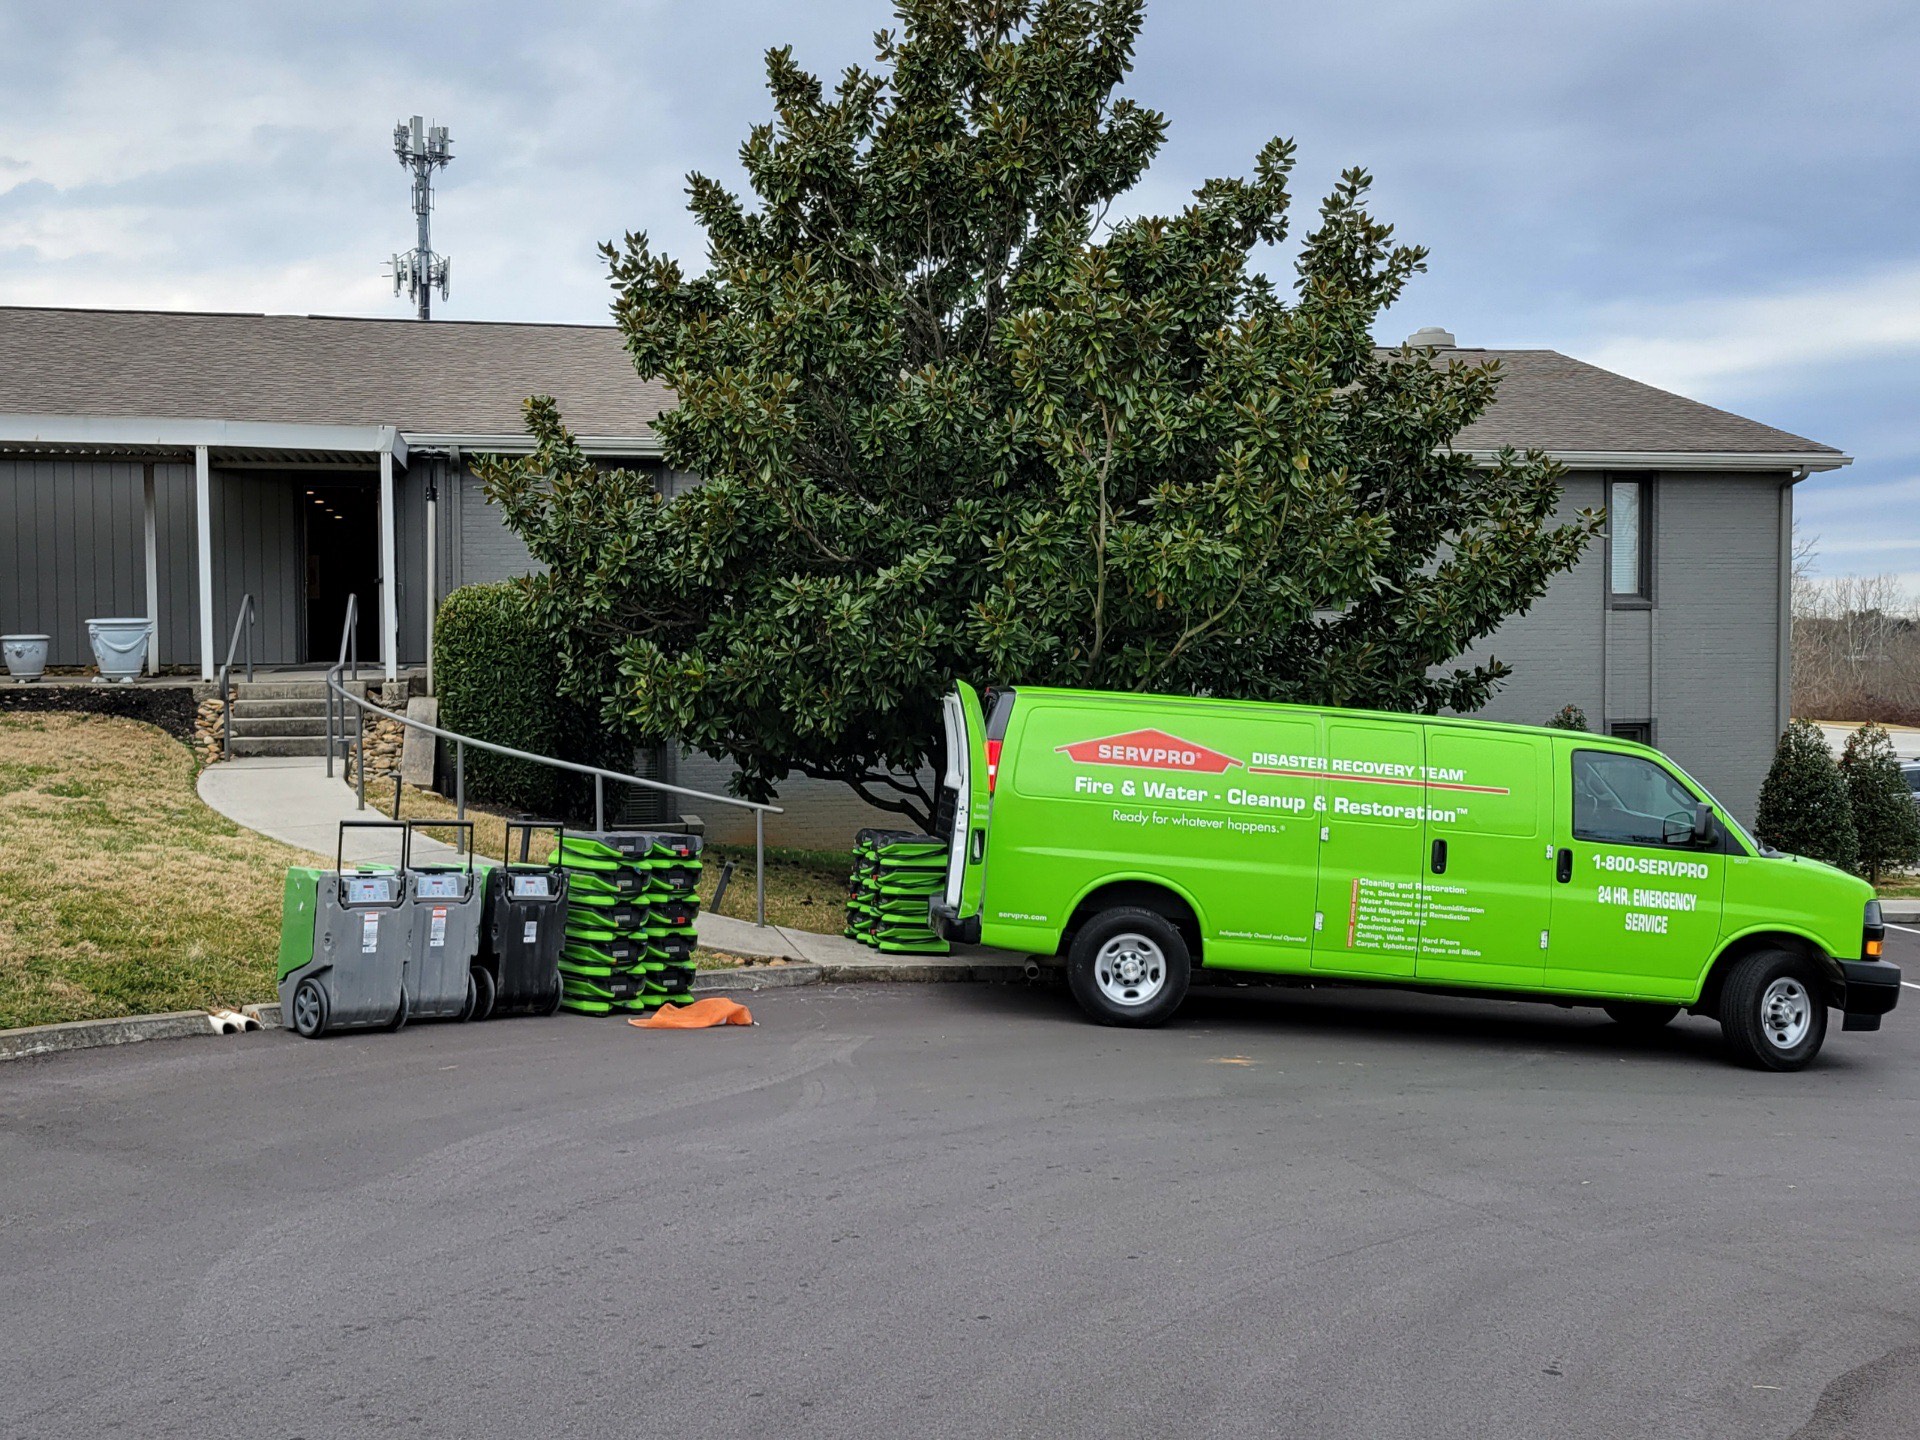 When you call, you can always count on a quick response! Our SERVPRO of DeLand team is available 24/7/365.